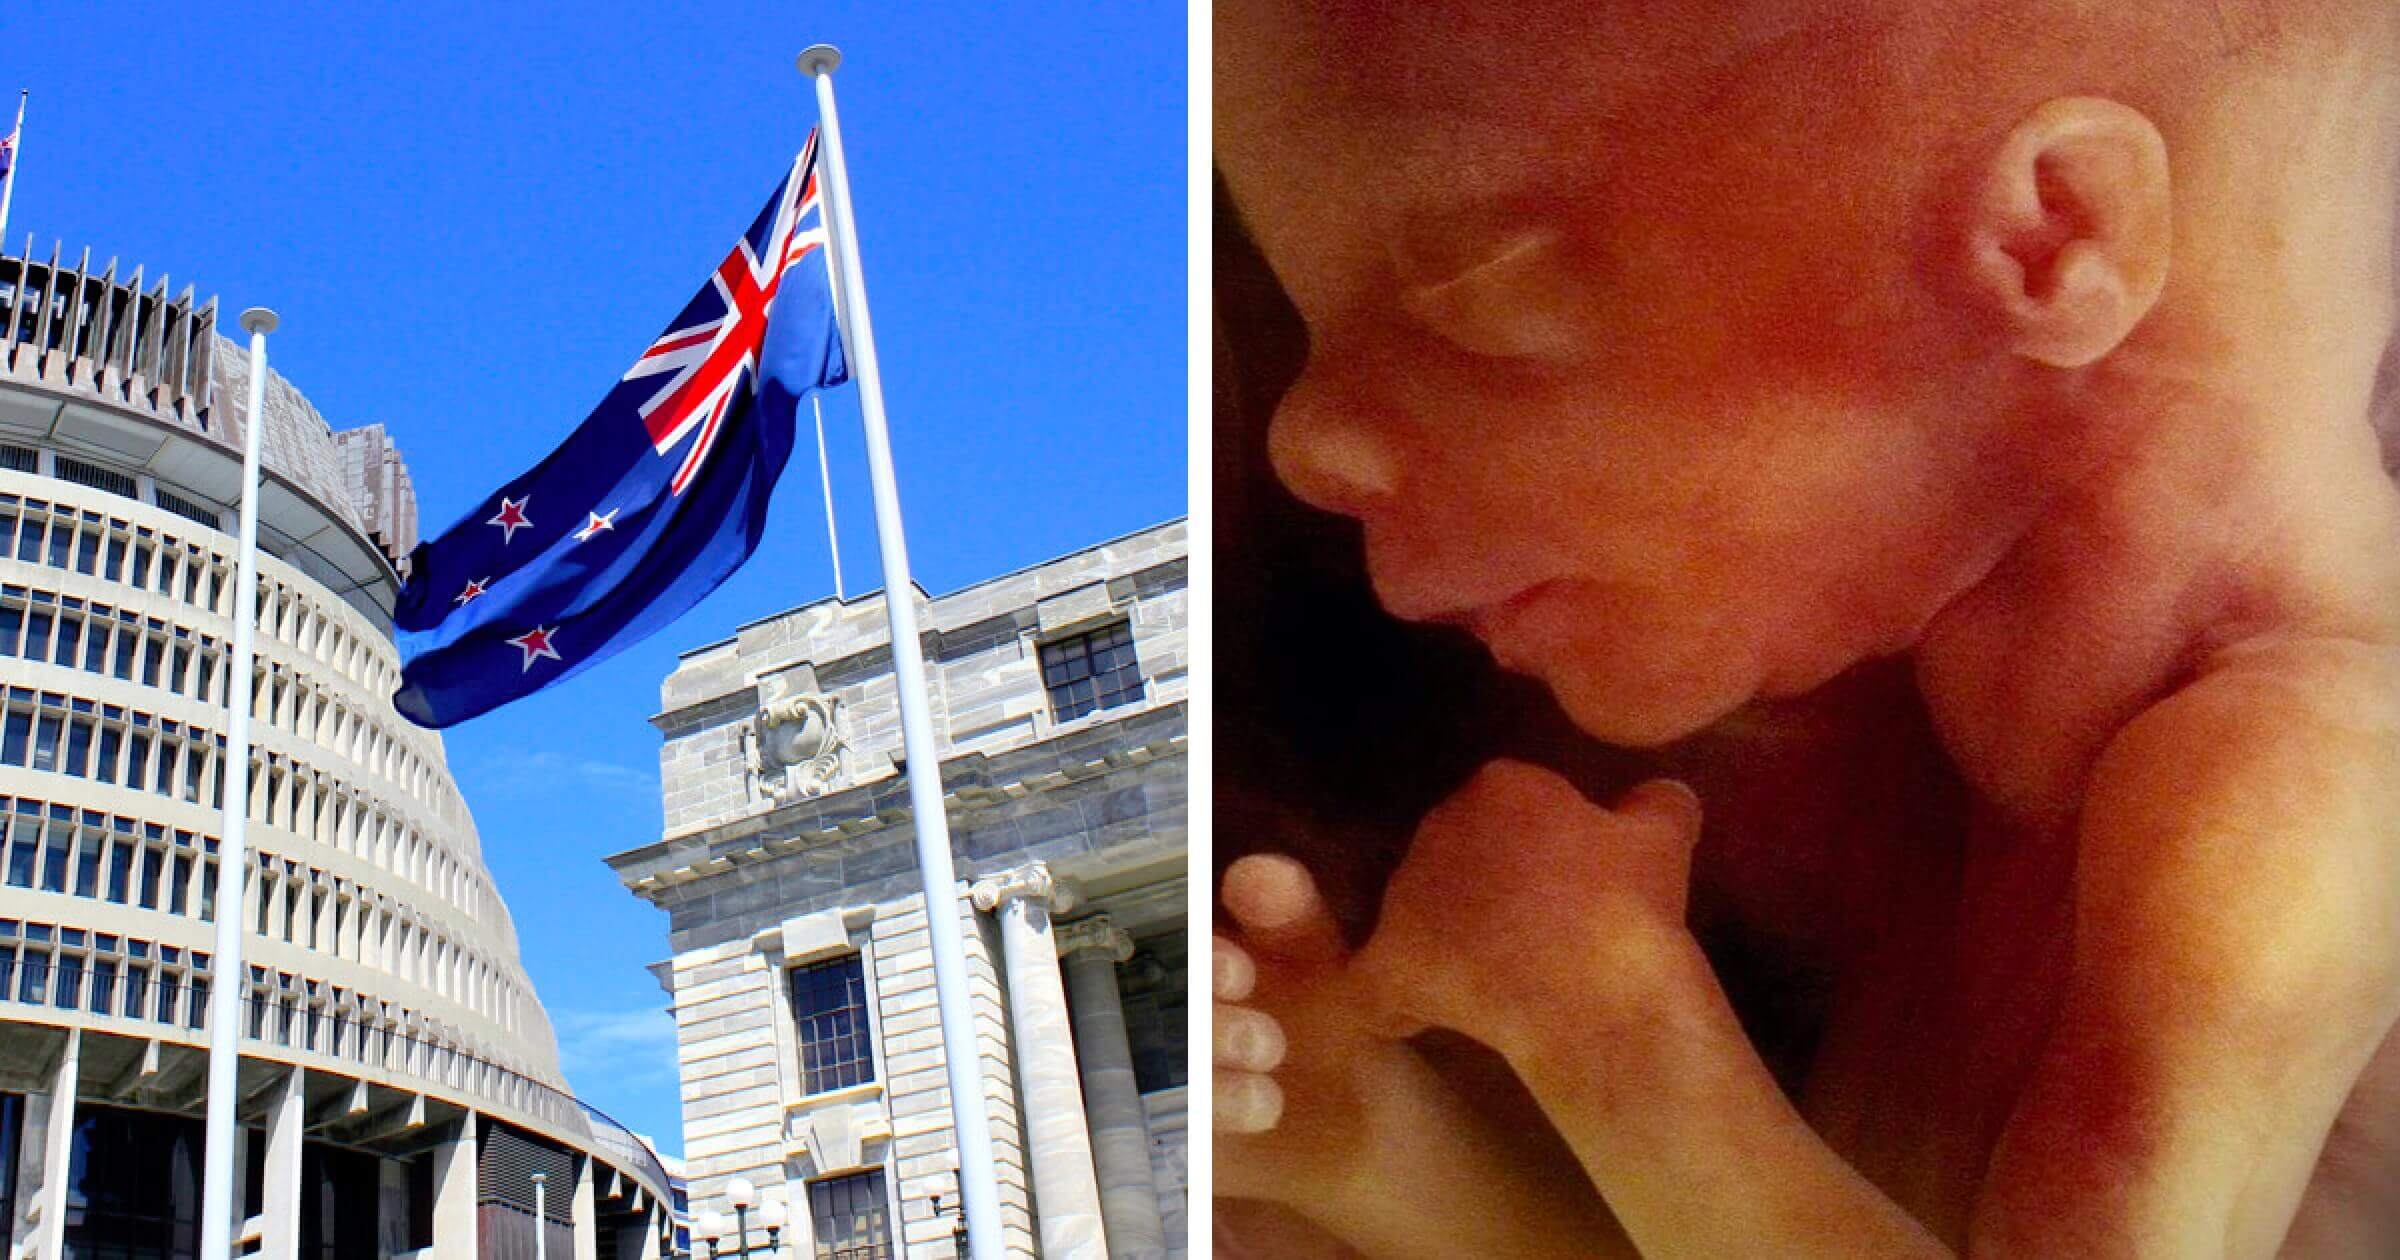 New Zealand birth rate lowest ever recorded